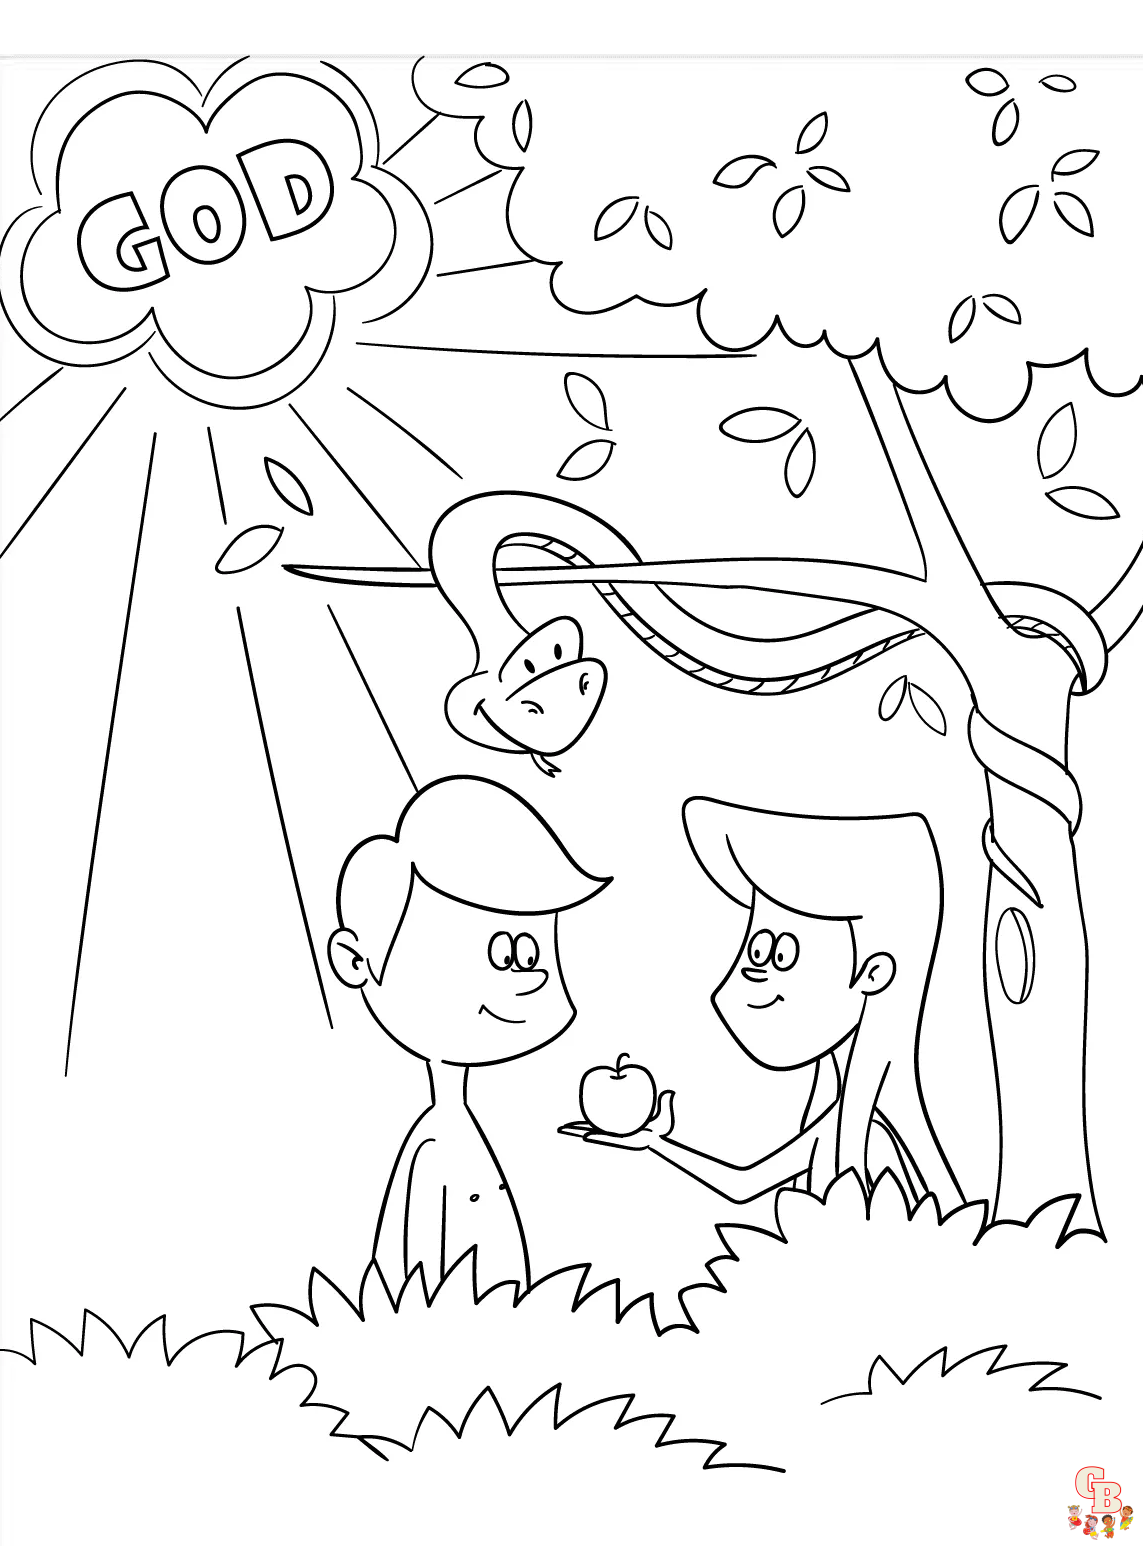 Adam and Eve Coloring Pages 3